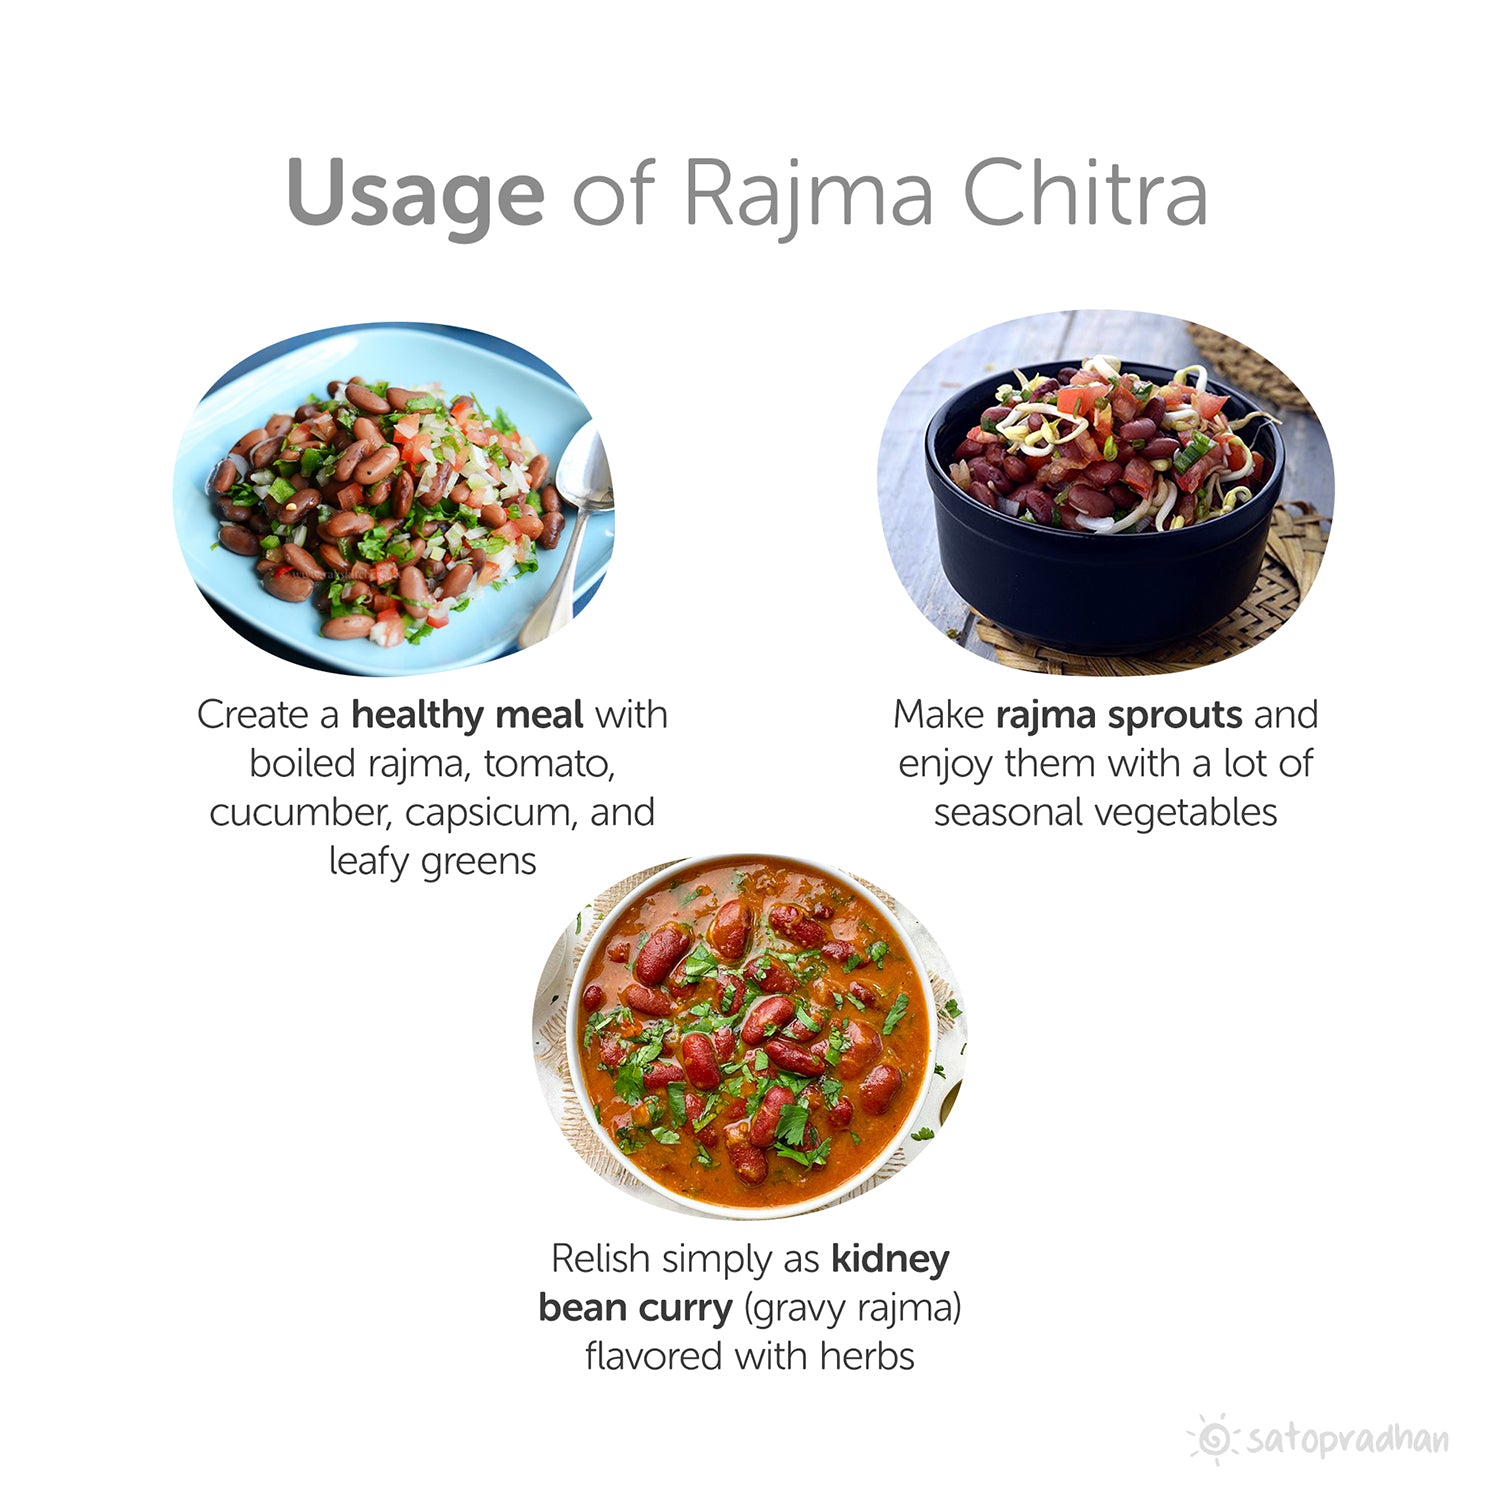 Rajma Chitra - Kidney Beans Chitra - Pinto Beans 800g - Organic, Raw, Unpolished & Wholesome - Choicest Quality without Additives